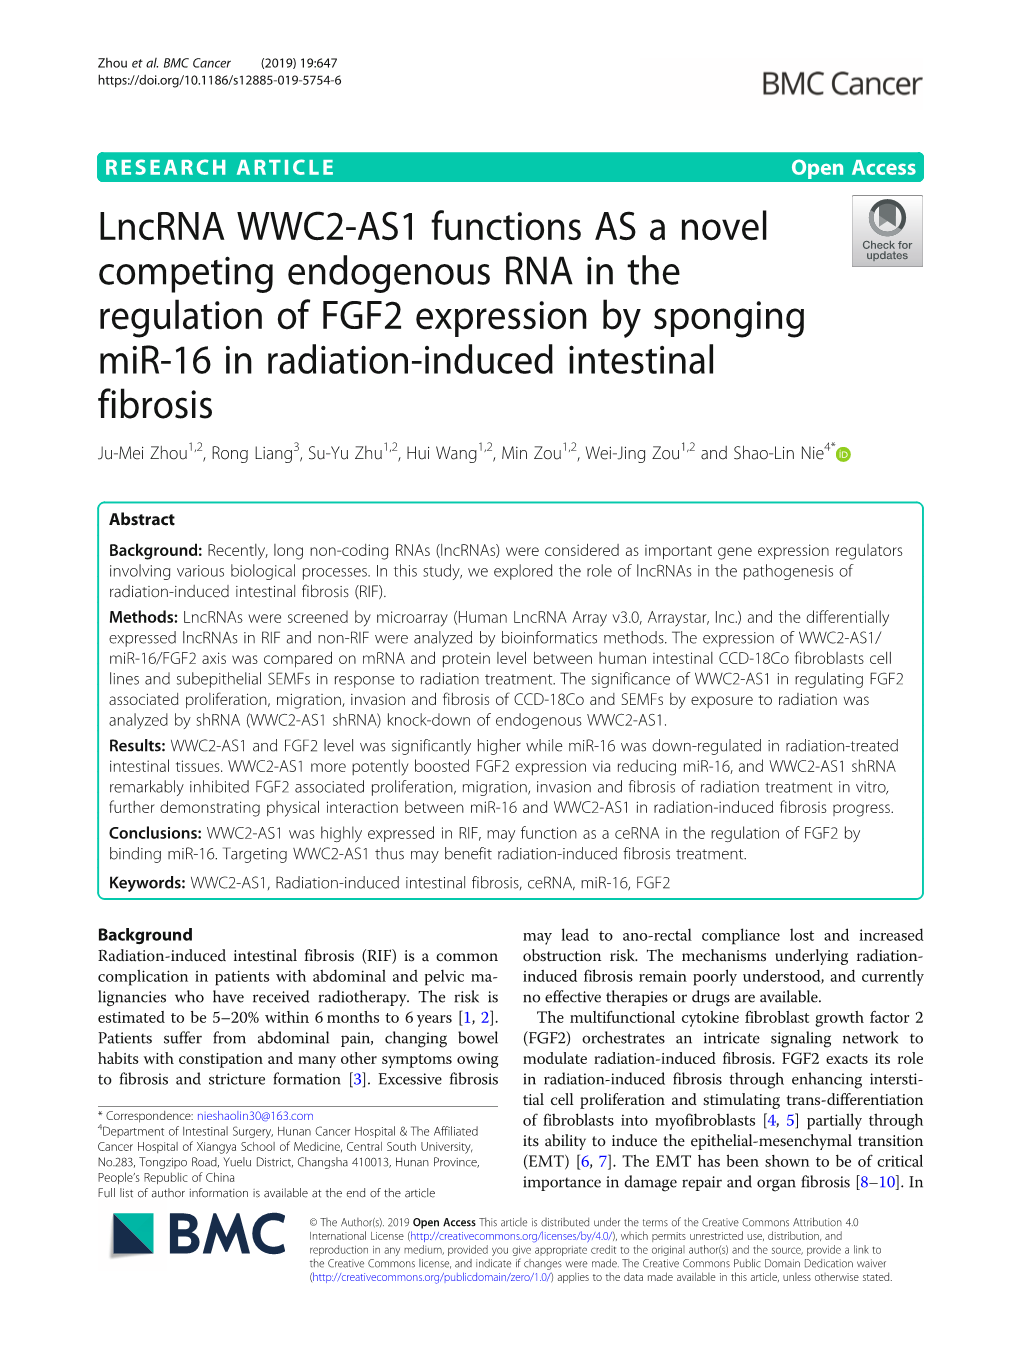 Lncrna WWC2-AS1 Functions AS a Novel Competing Endogenous RNA in the Regulation of FGF2 Expression by Sponging Mir-16 in Radiati